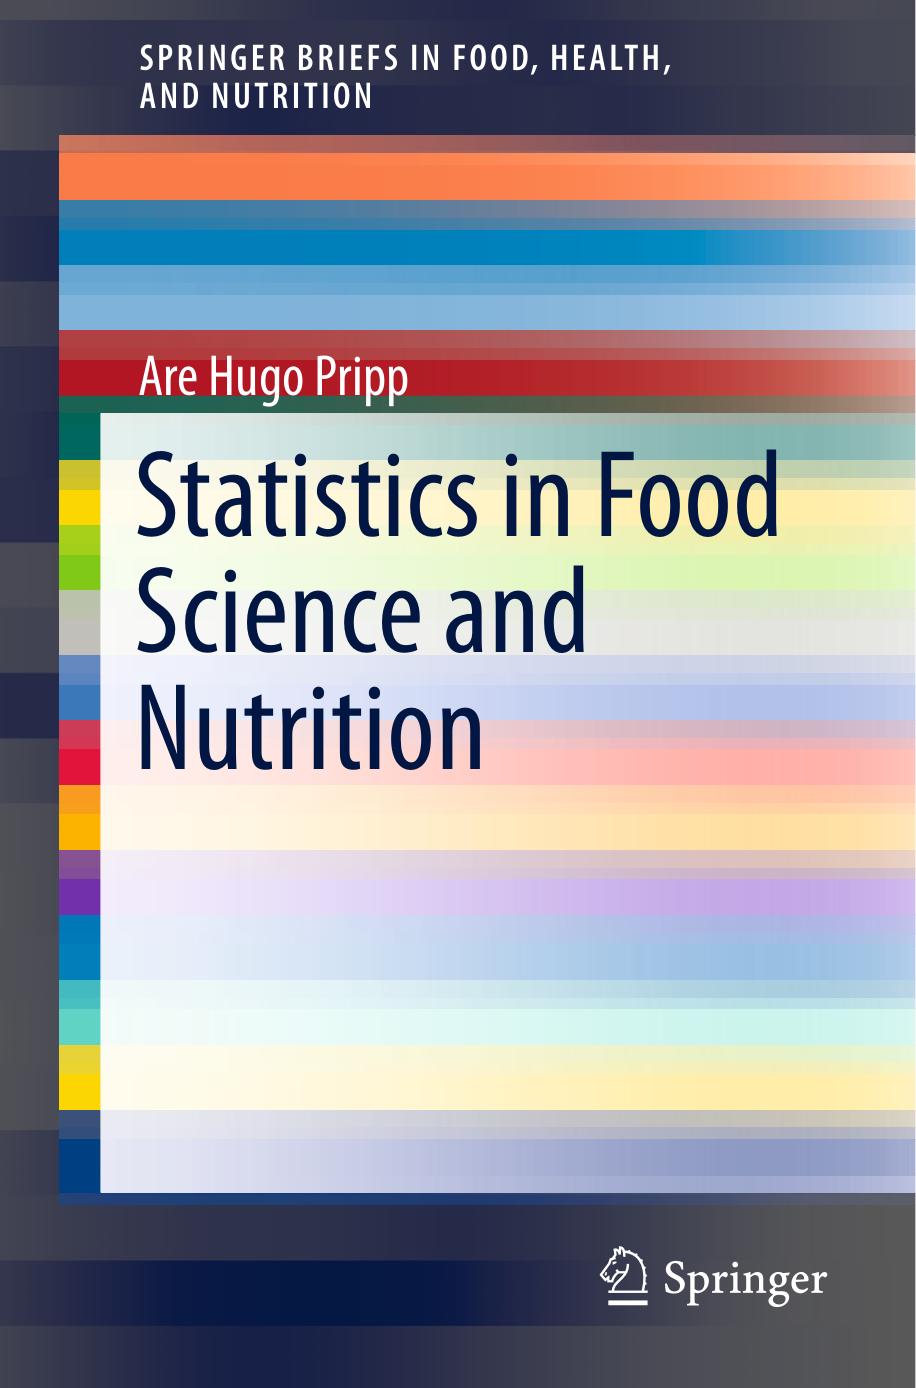 Statistics in Food Science and Nutrition (1) 2013